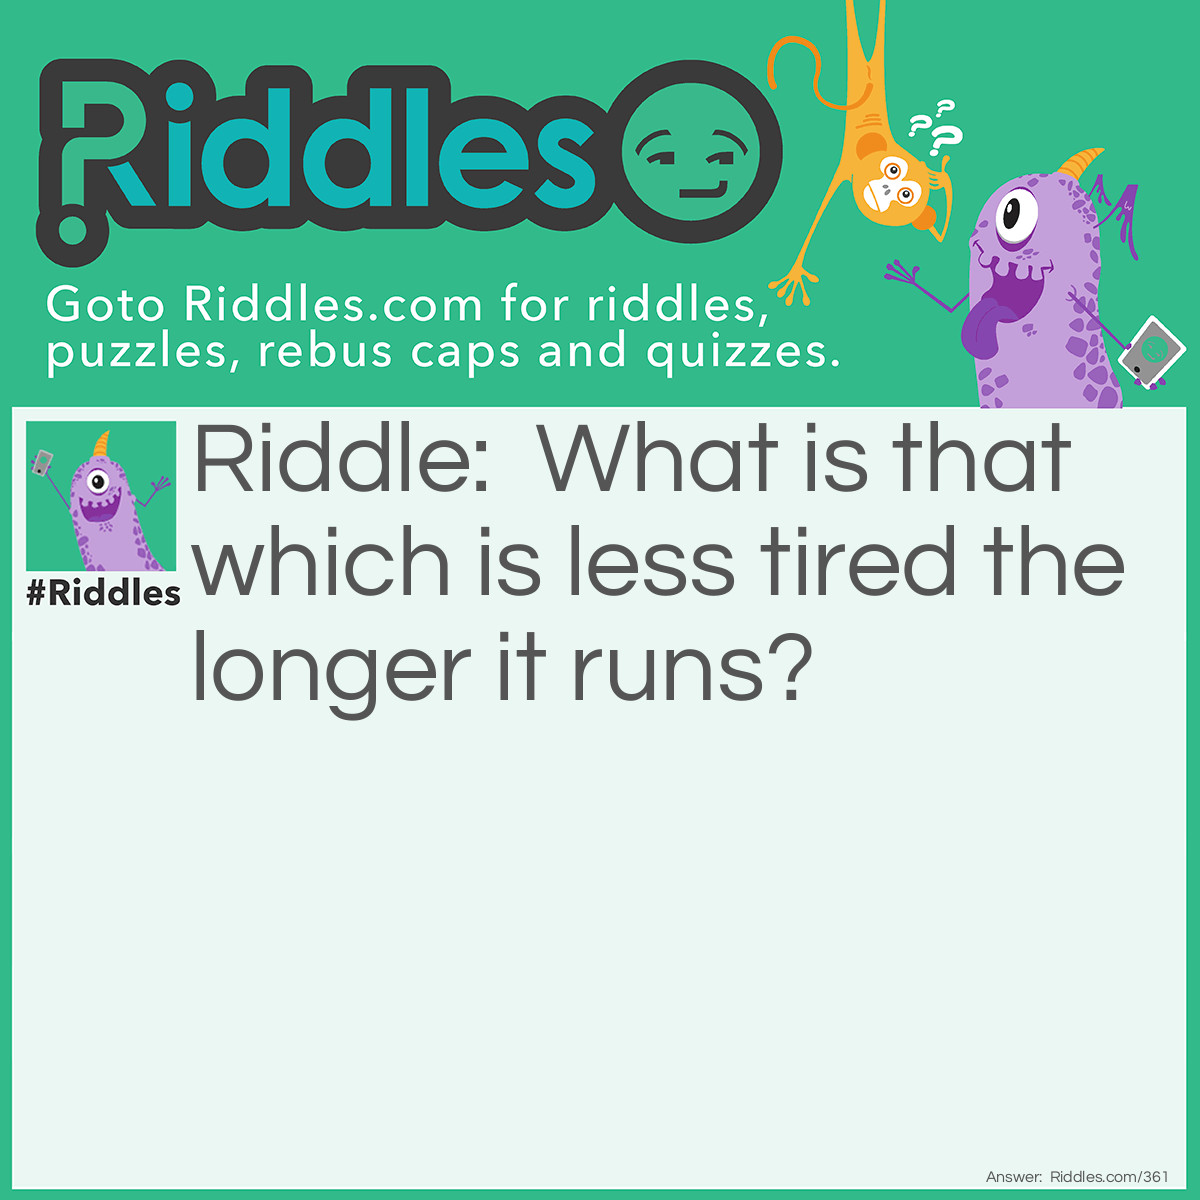 Riddle: What is that which is less tired the longer it runs? Answer: A wheel.